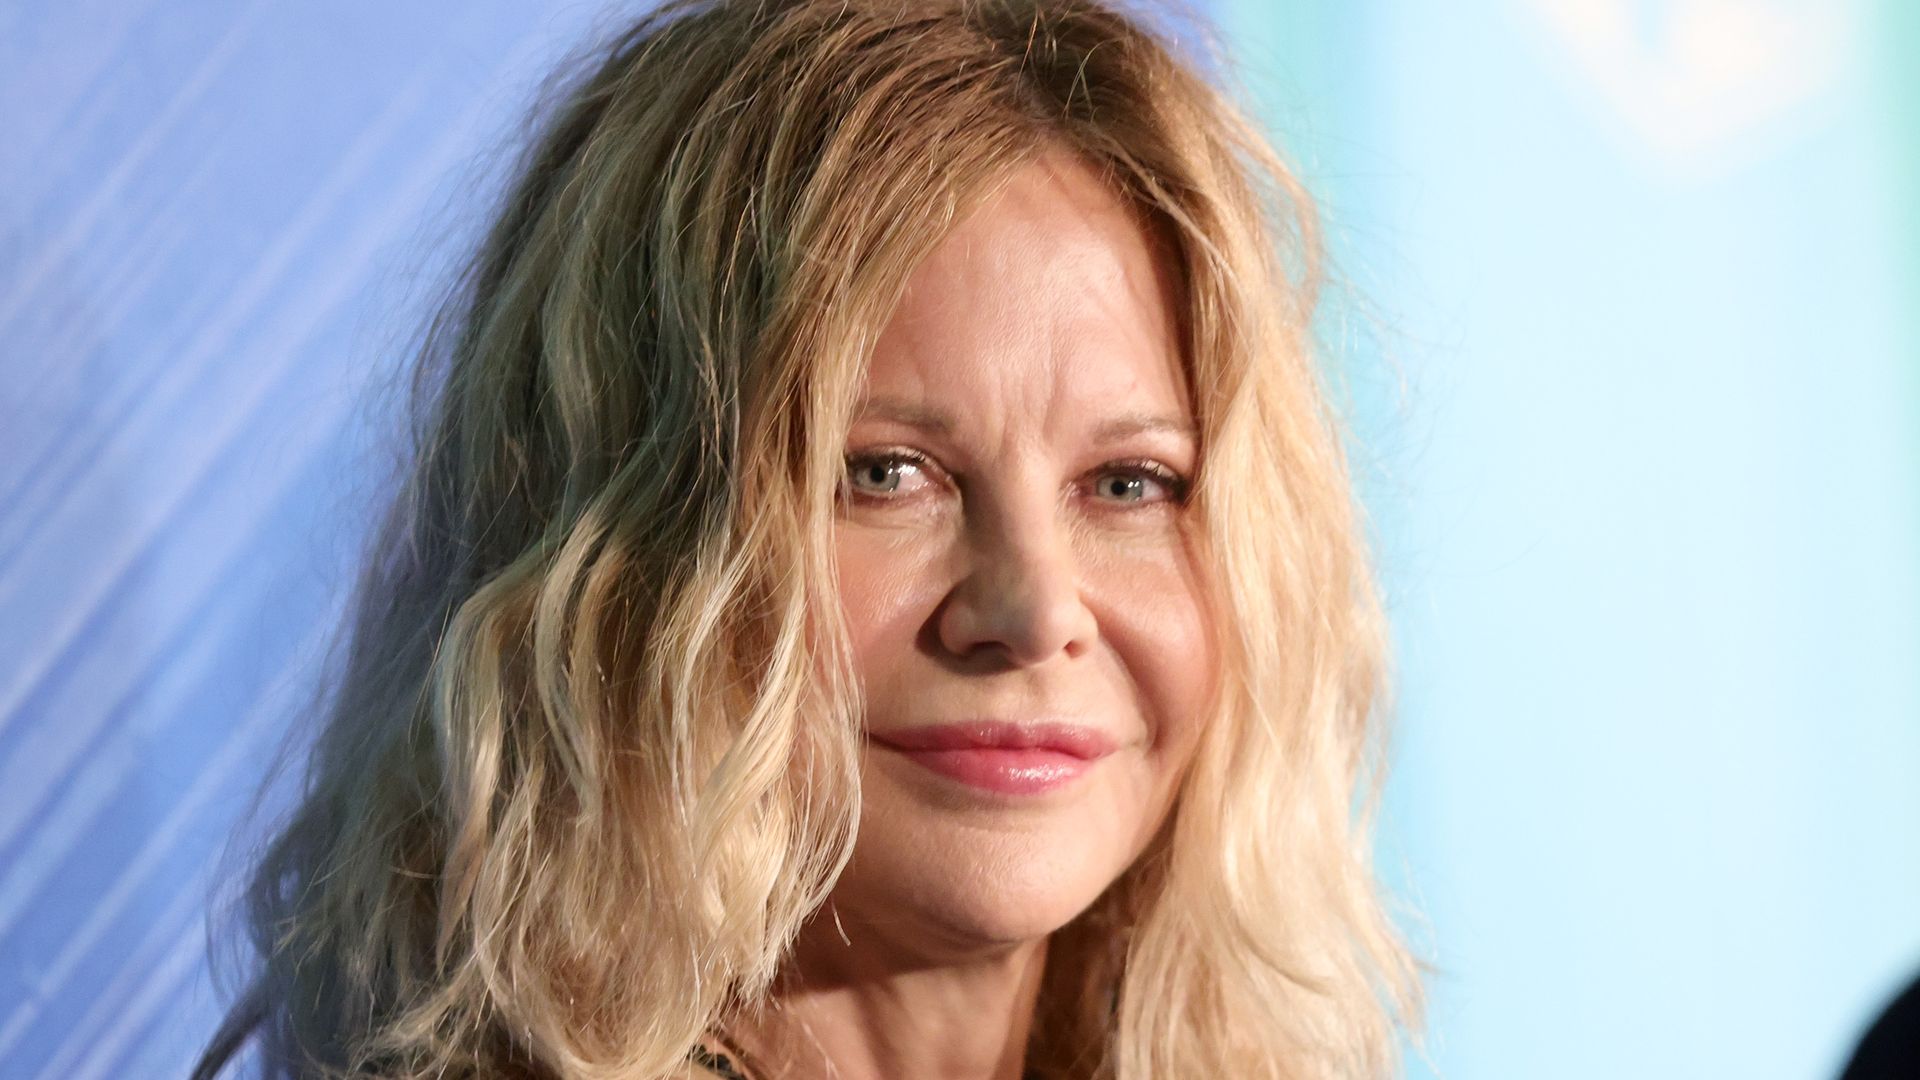 Meg Ryan shares rare details of motherhood role as she makes return to Hollywood